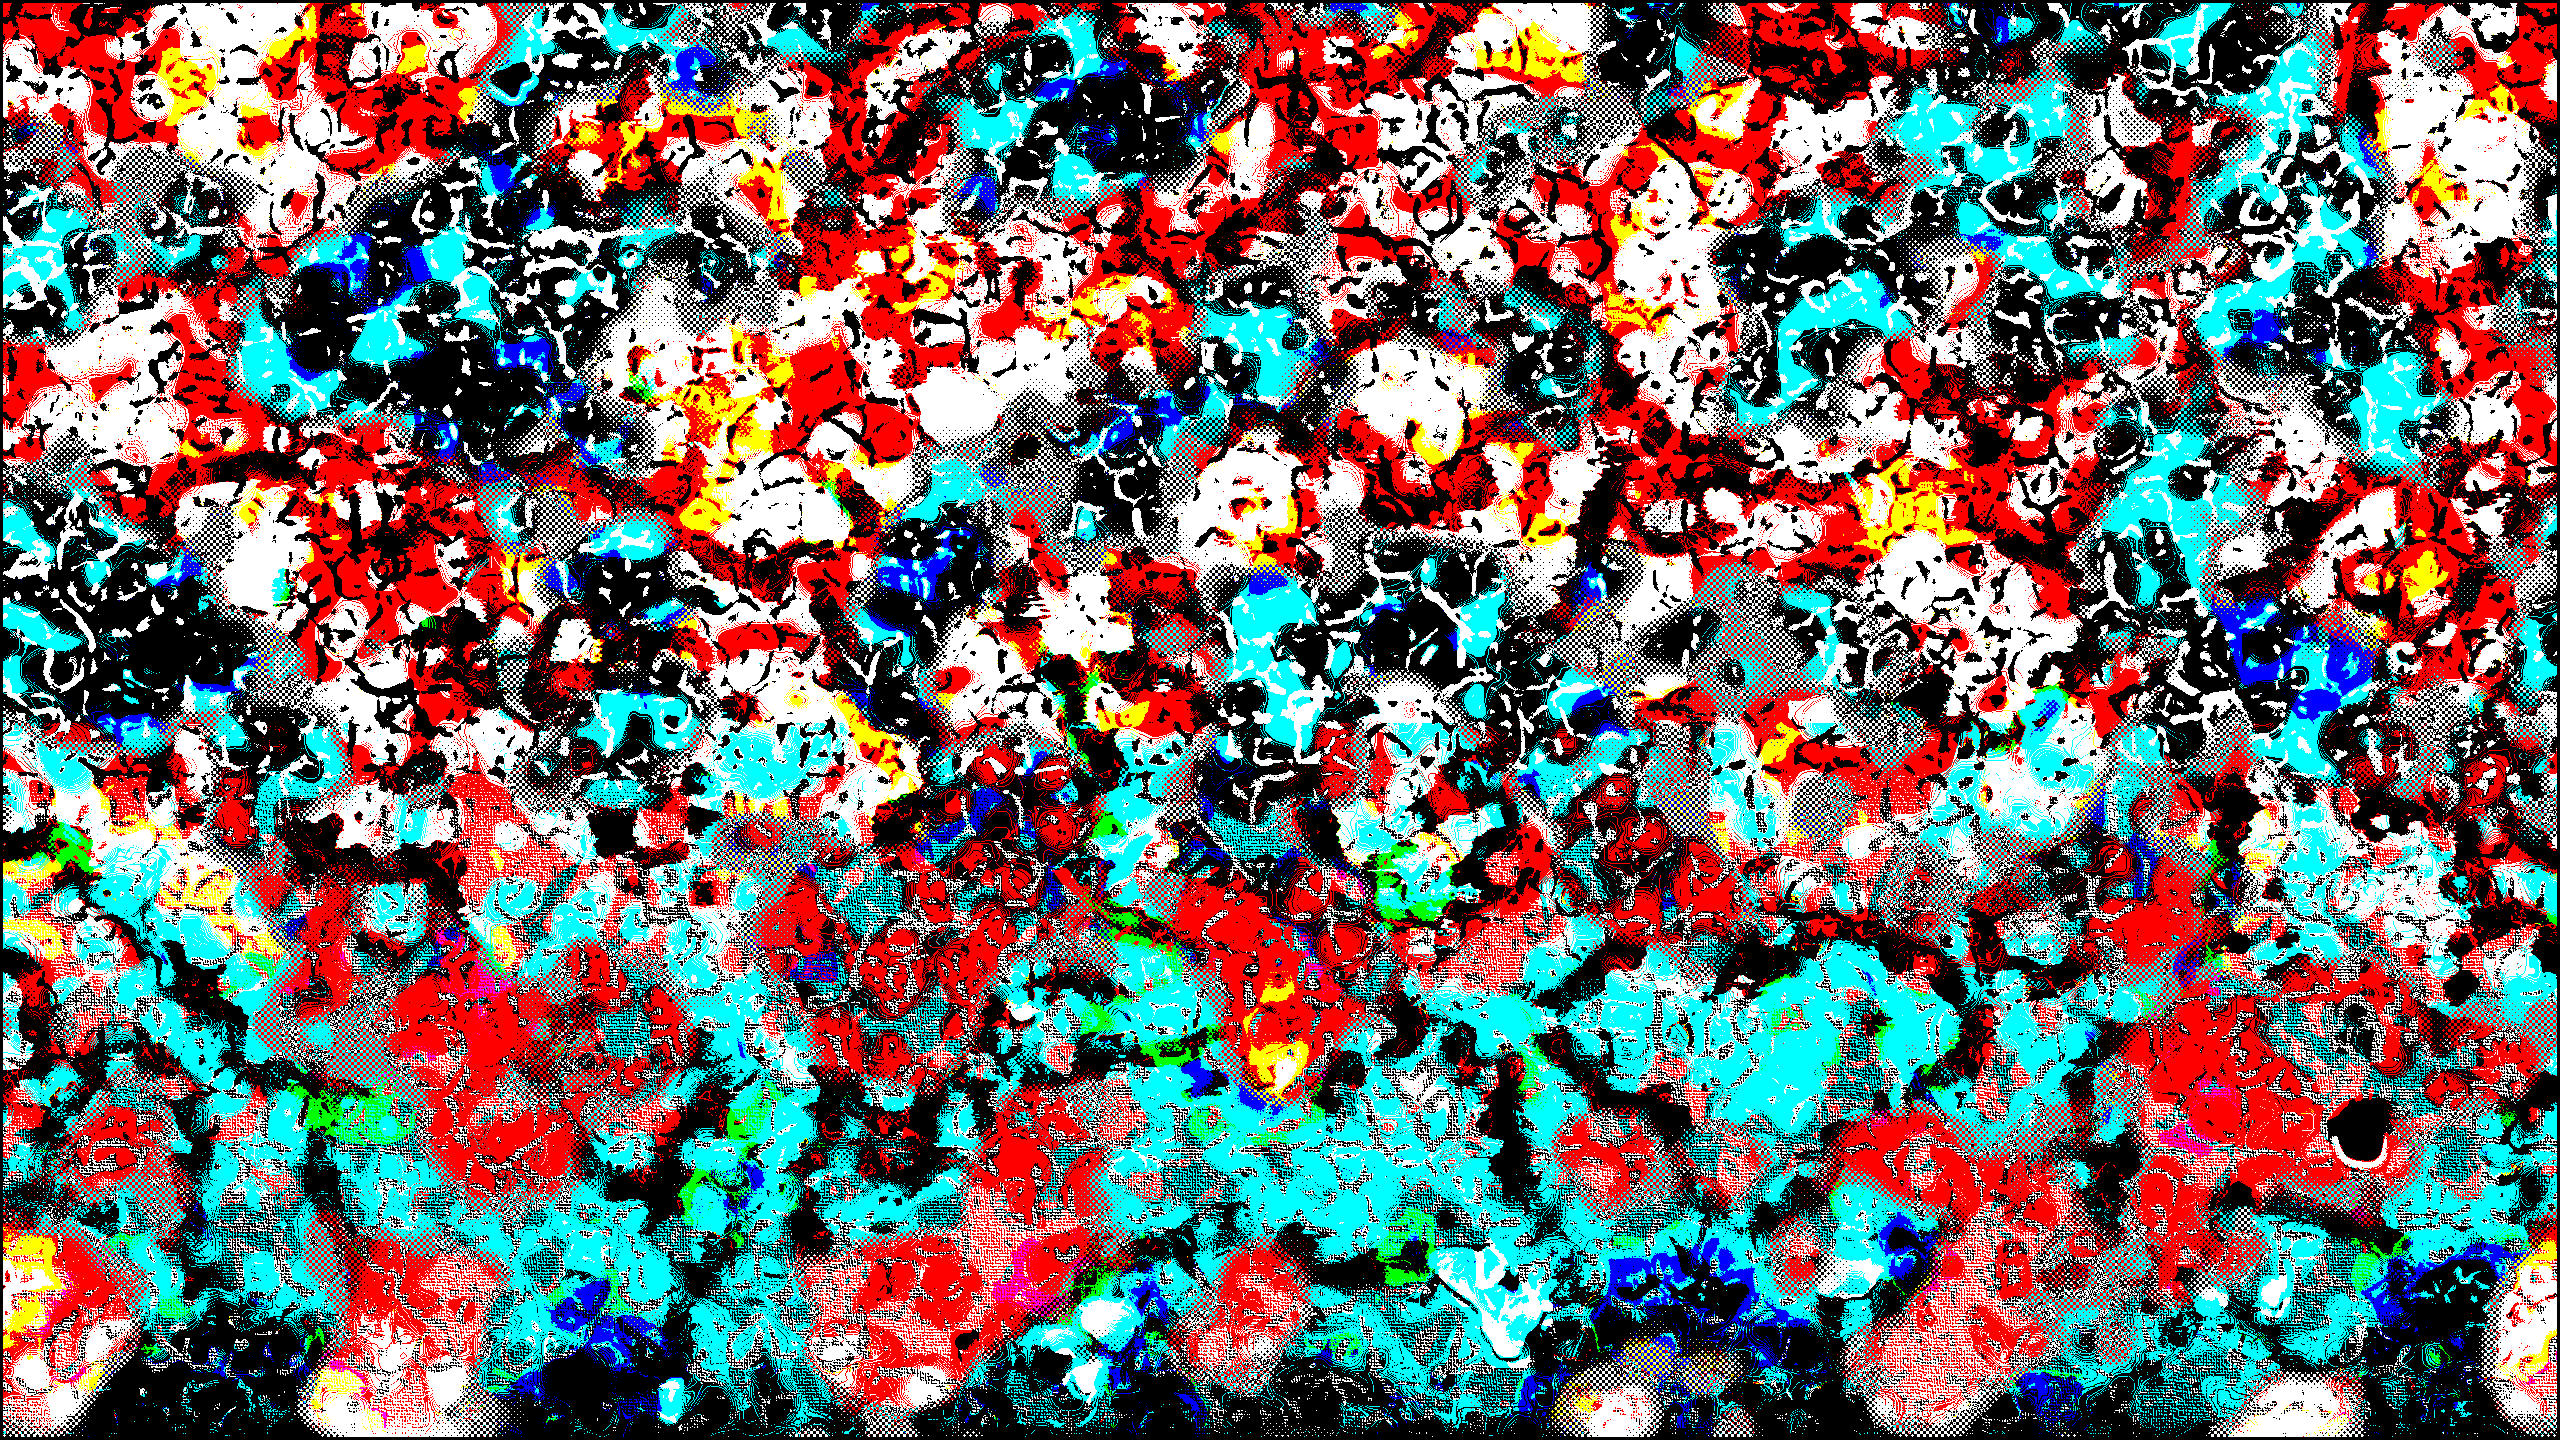 Brightness Digital Art Abstract Trippy Psychedelic 2560x1440